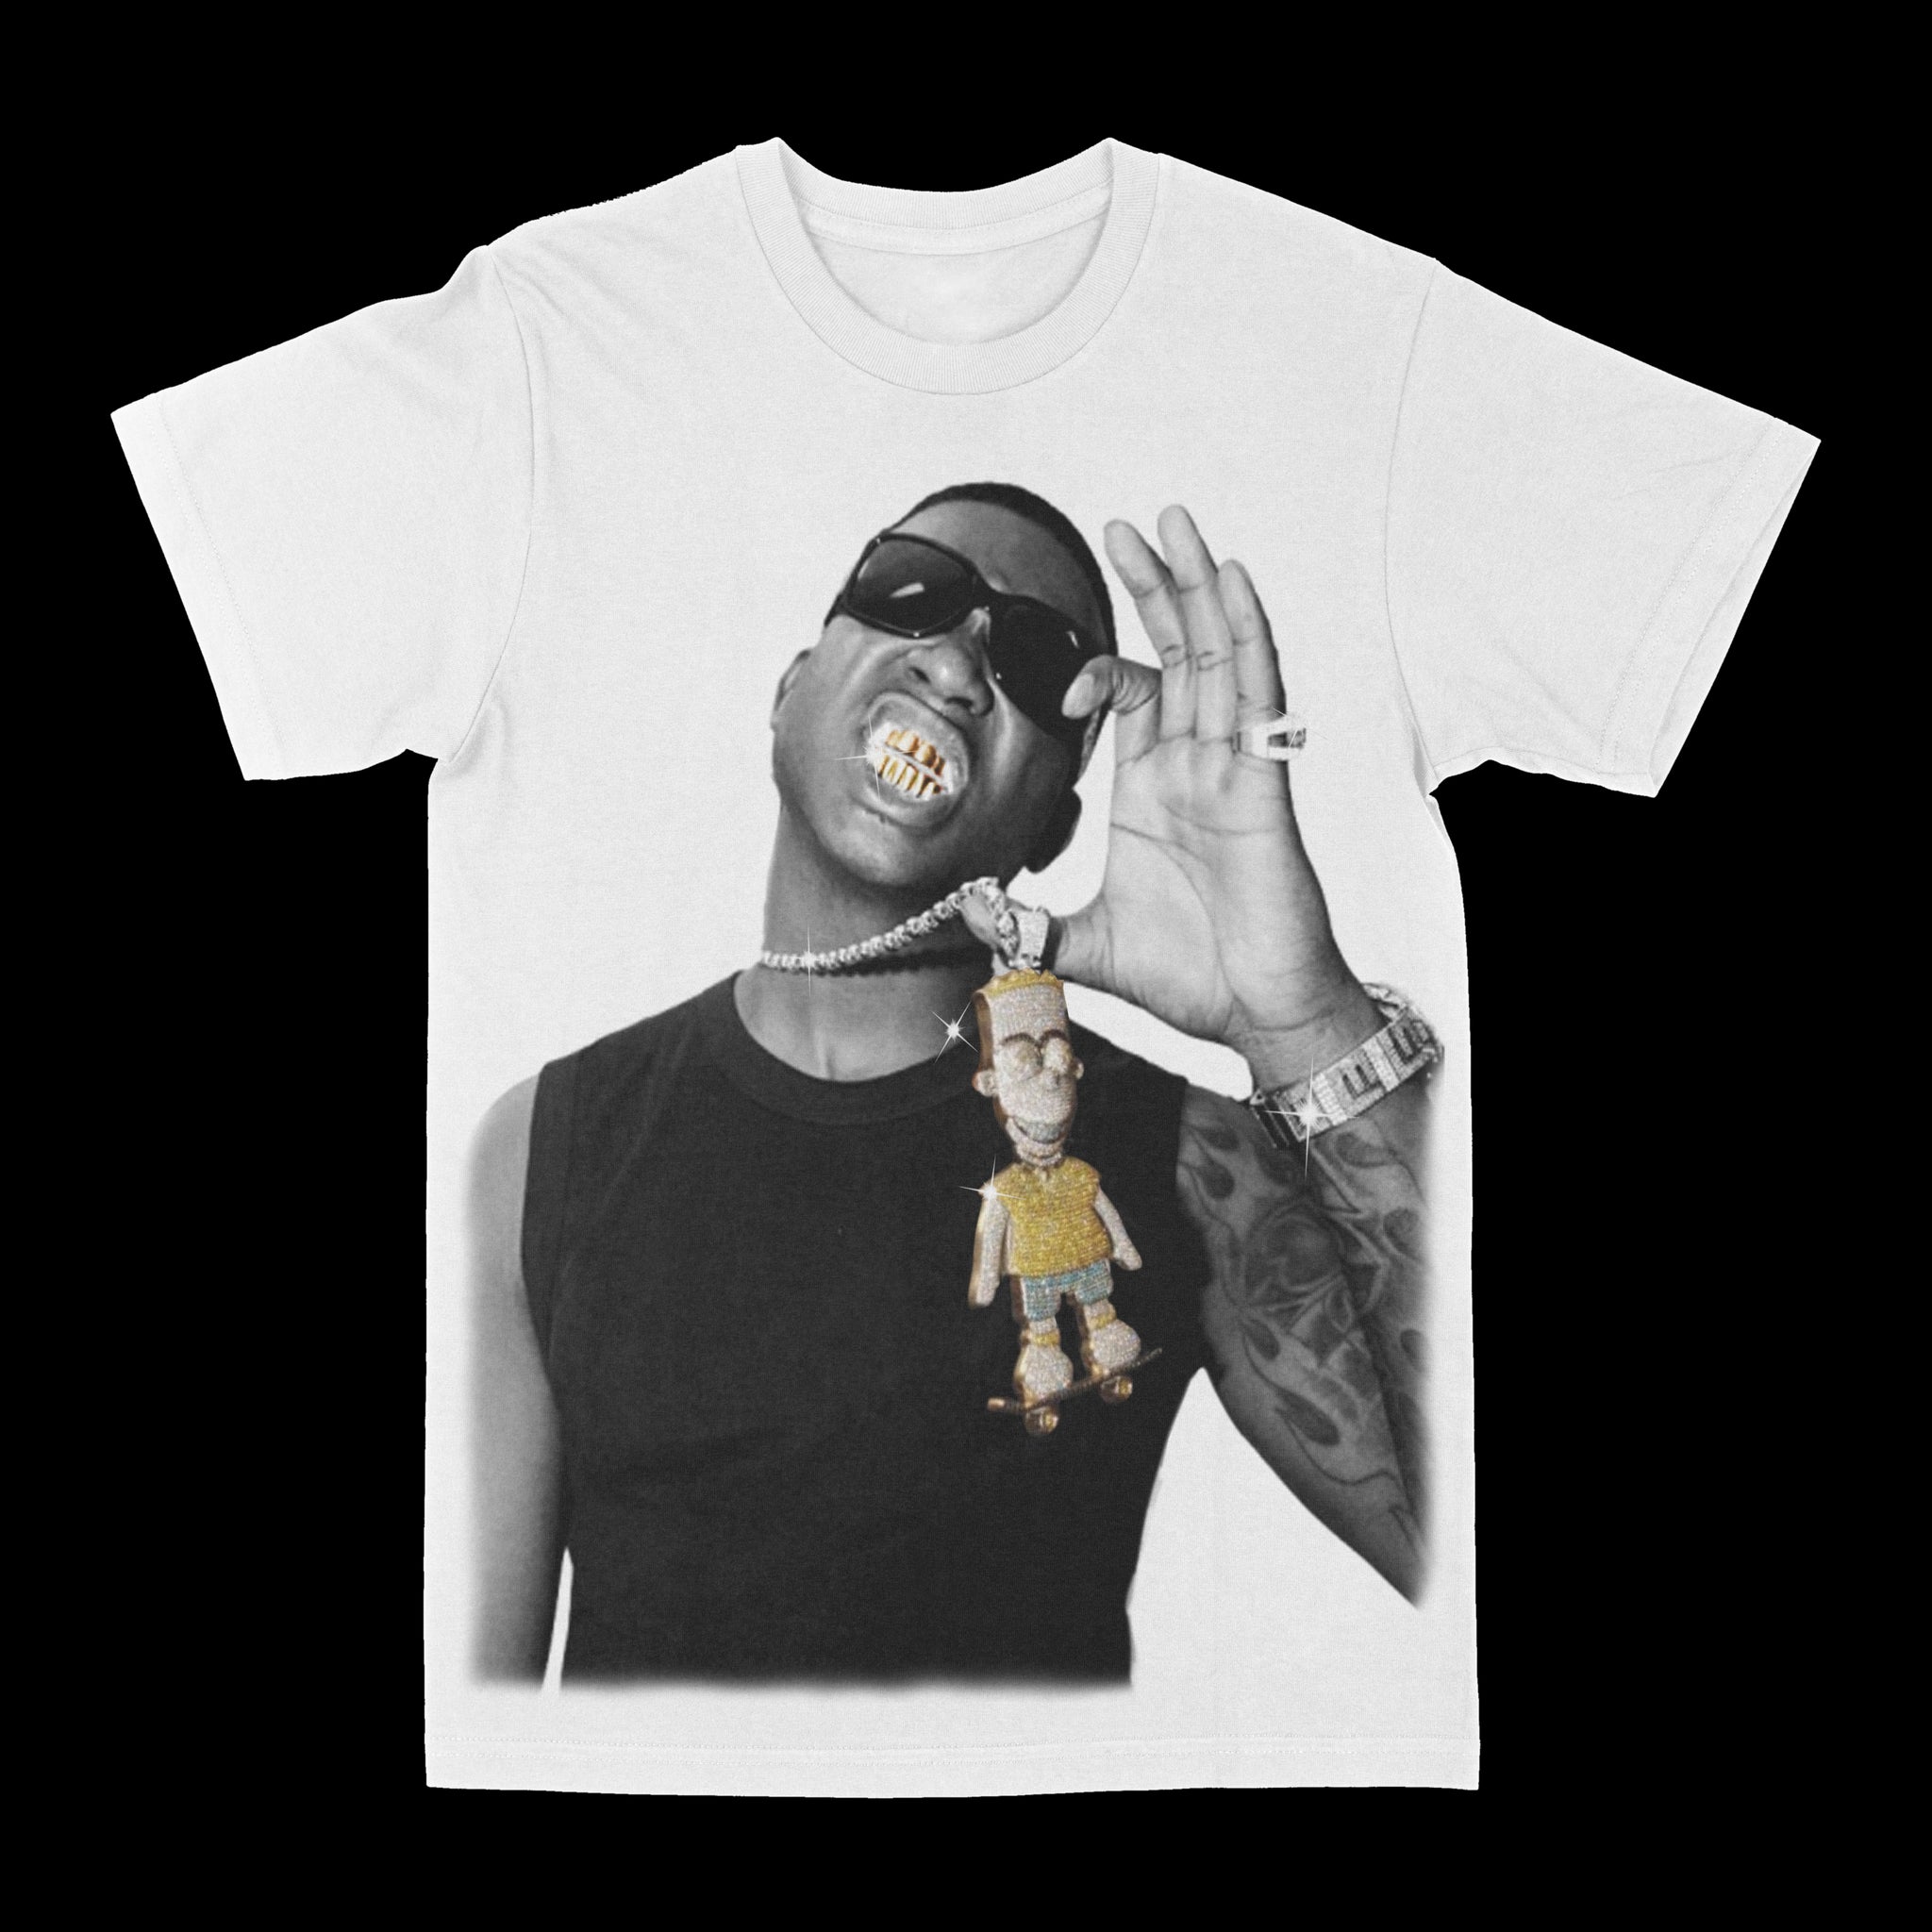 Gucci Mane "Gold Grill" Graphic Tee